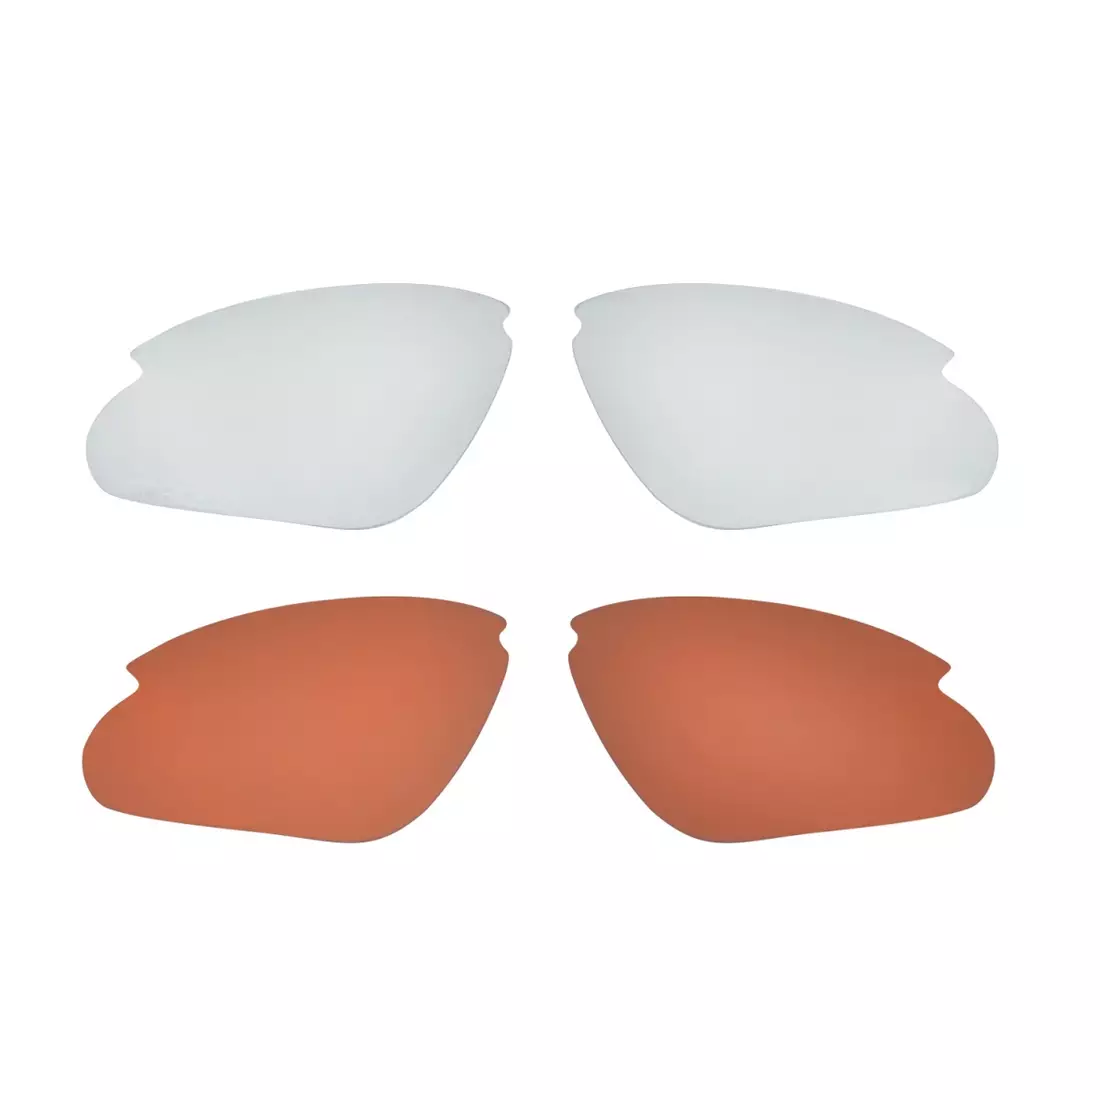 FORCE AIR glasses with replaceable lenses, white and red 91043